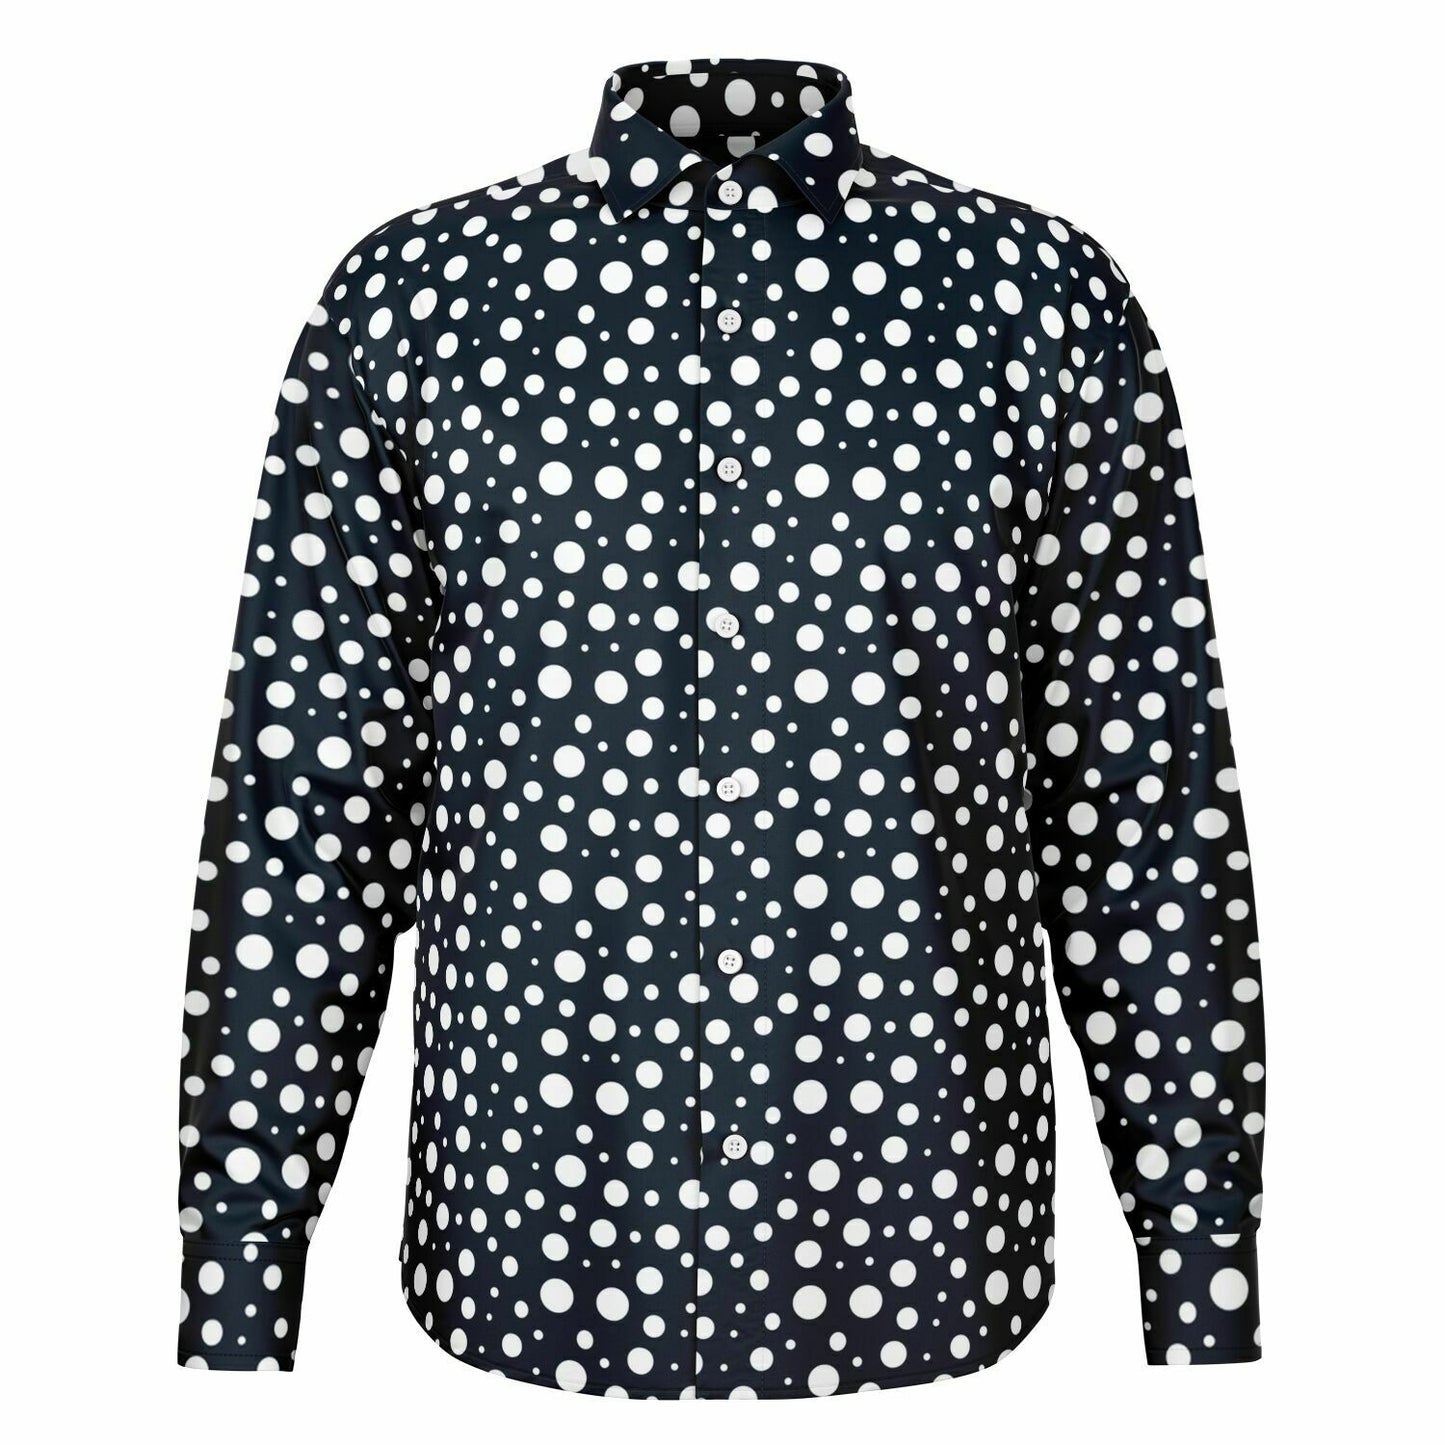 Navy Blue Polka Dots Long Sleeve Men Button Up Shirt, Dark Blue Guys Male Print Buttoned Down Collared Graphic Casual Dress Plus Size Shirt